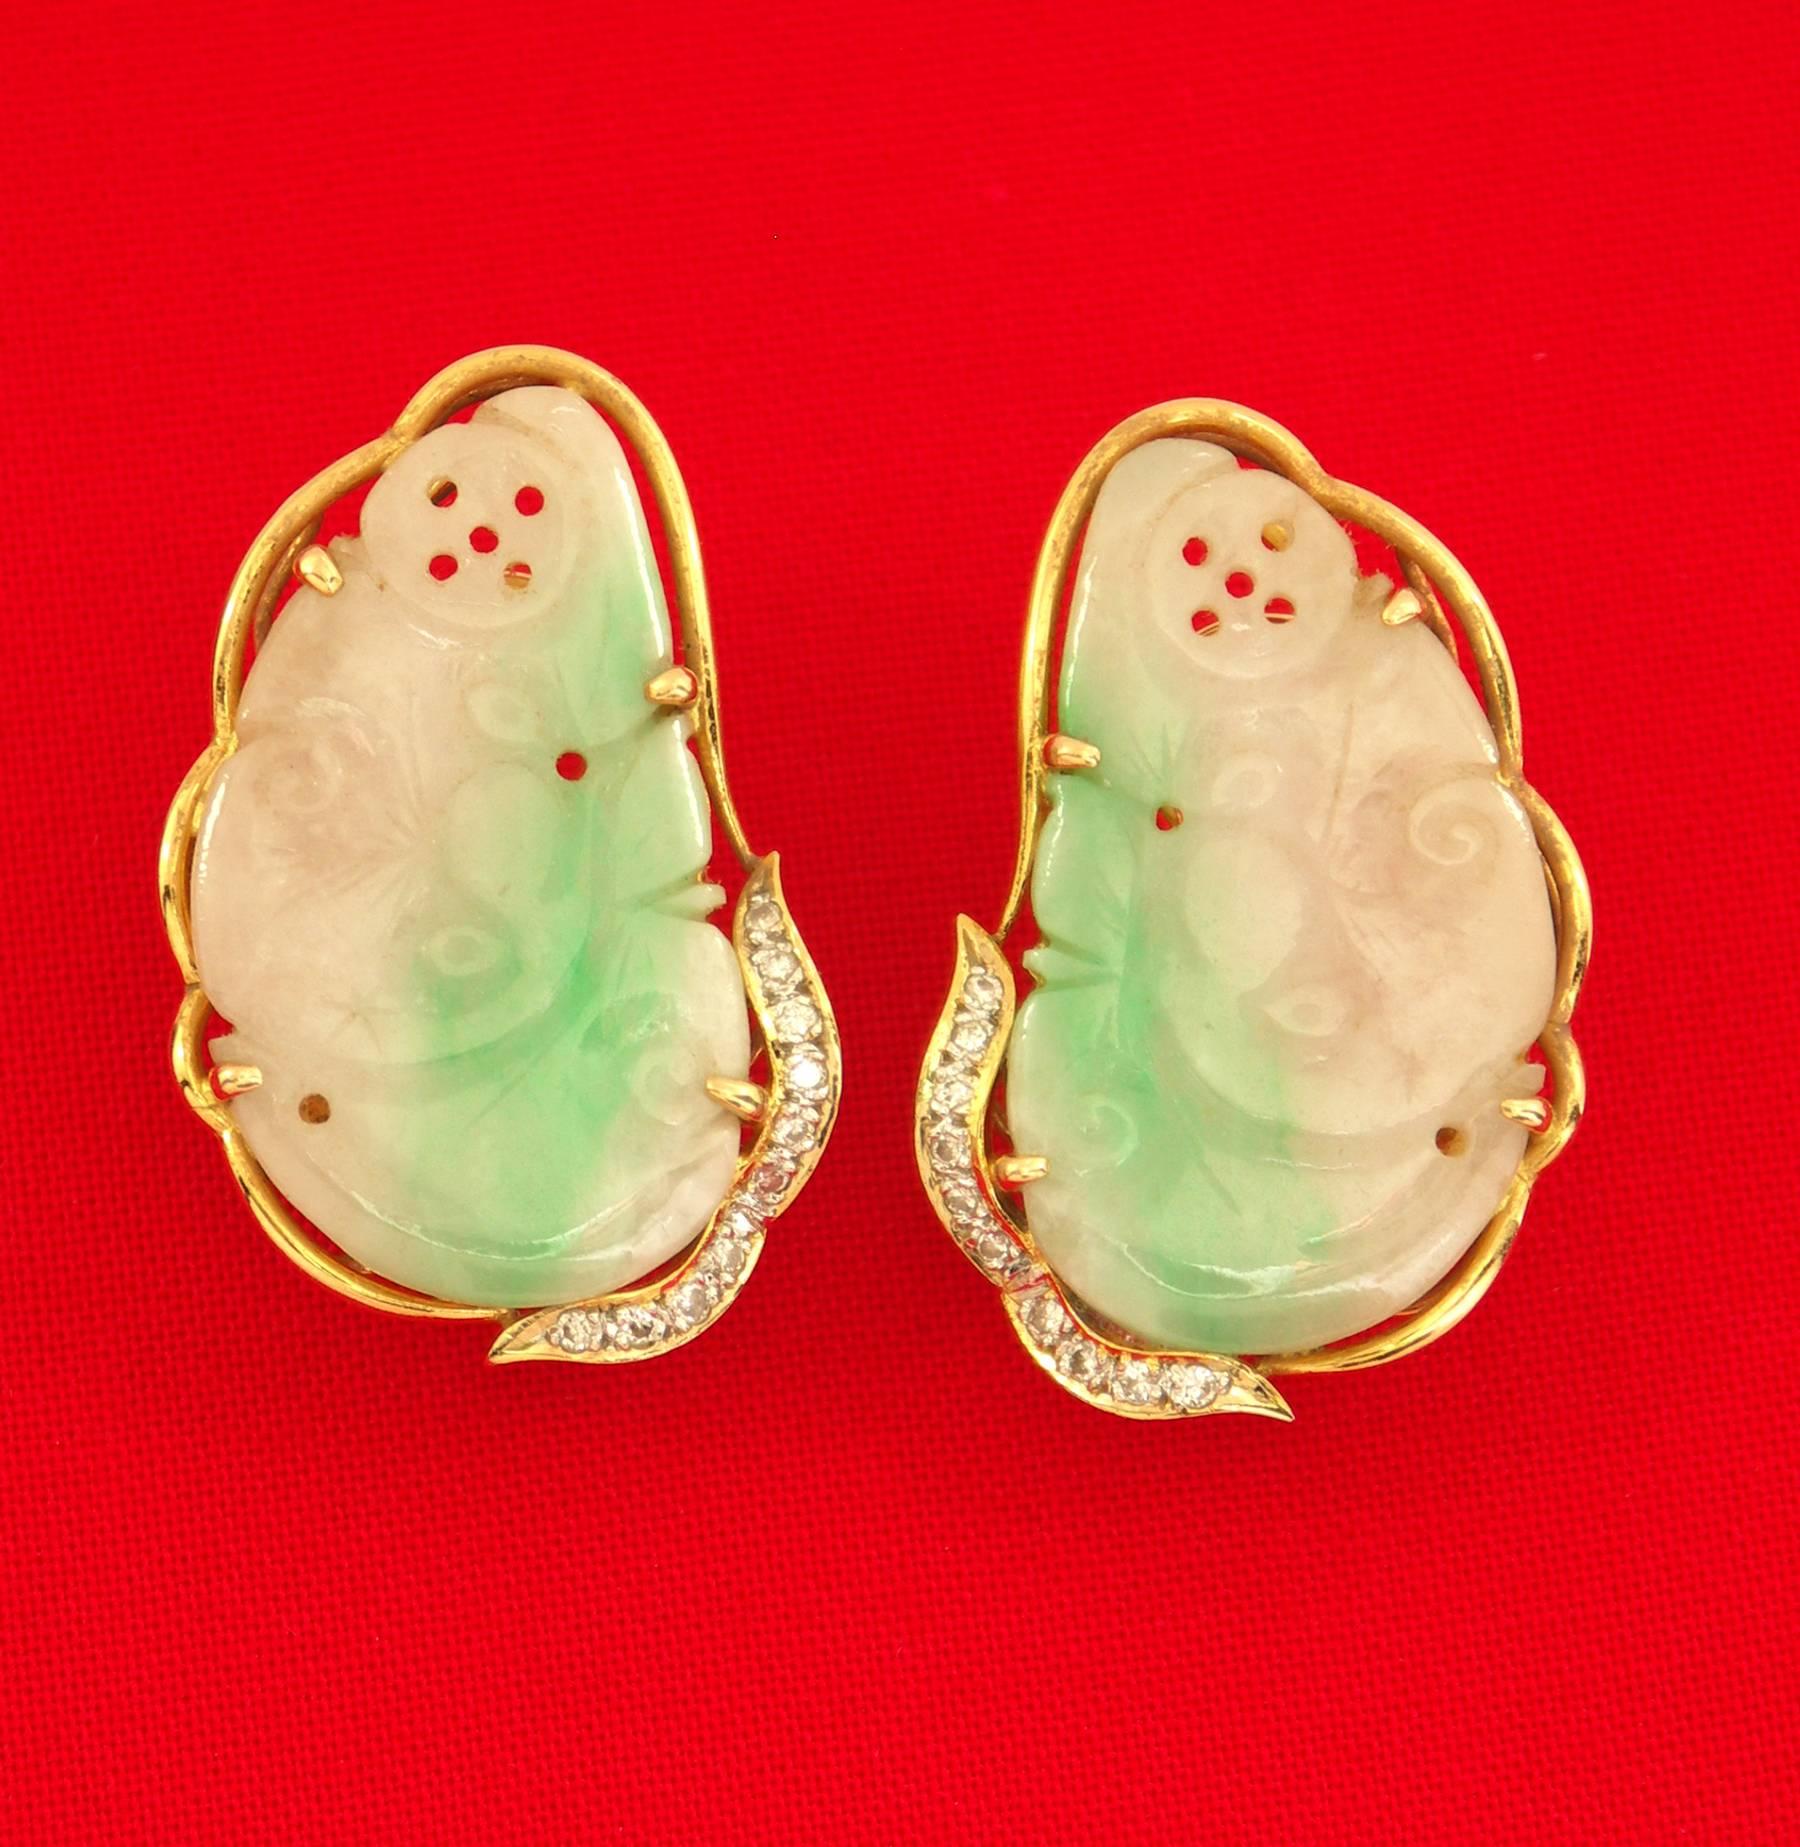 A pair of 18K yellow gold earrings, each set with a piece of carved jade measuring 1 1/4 inches long, and 5/8 of an inch wide. Each earring is also set with 10 single cut diamonds with a combined overall weight of approximately 0.25ct.